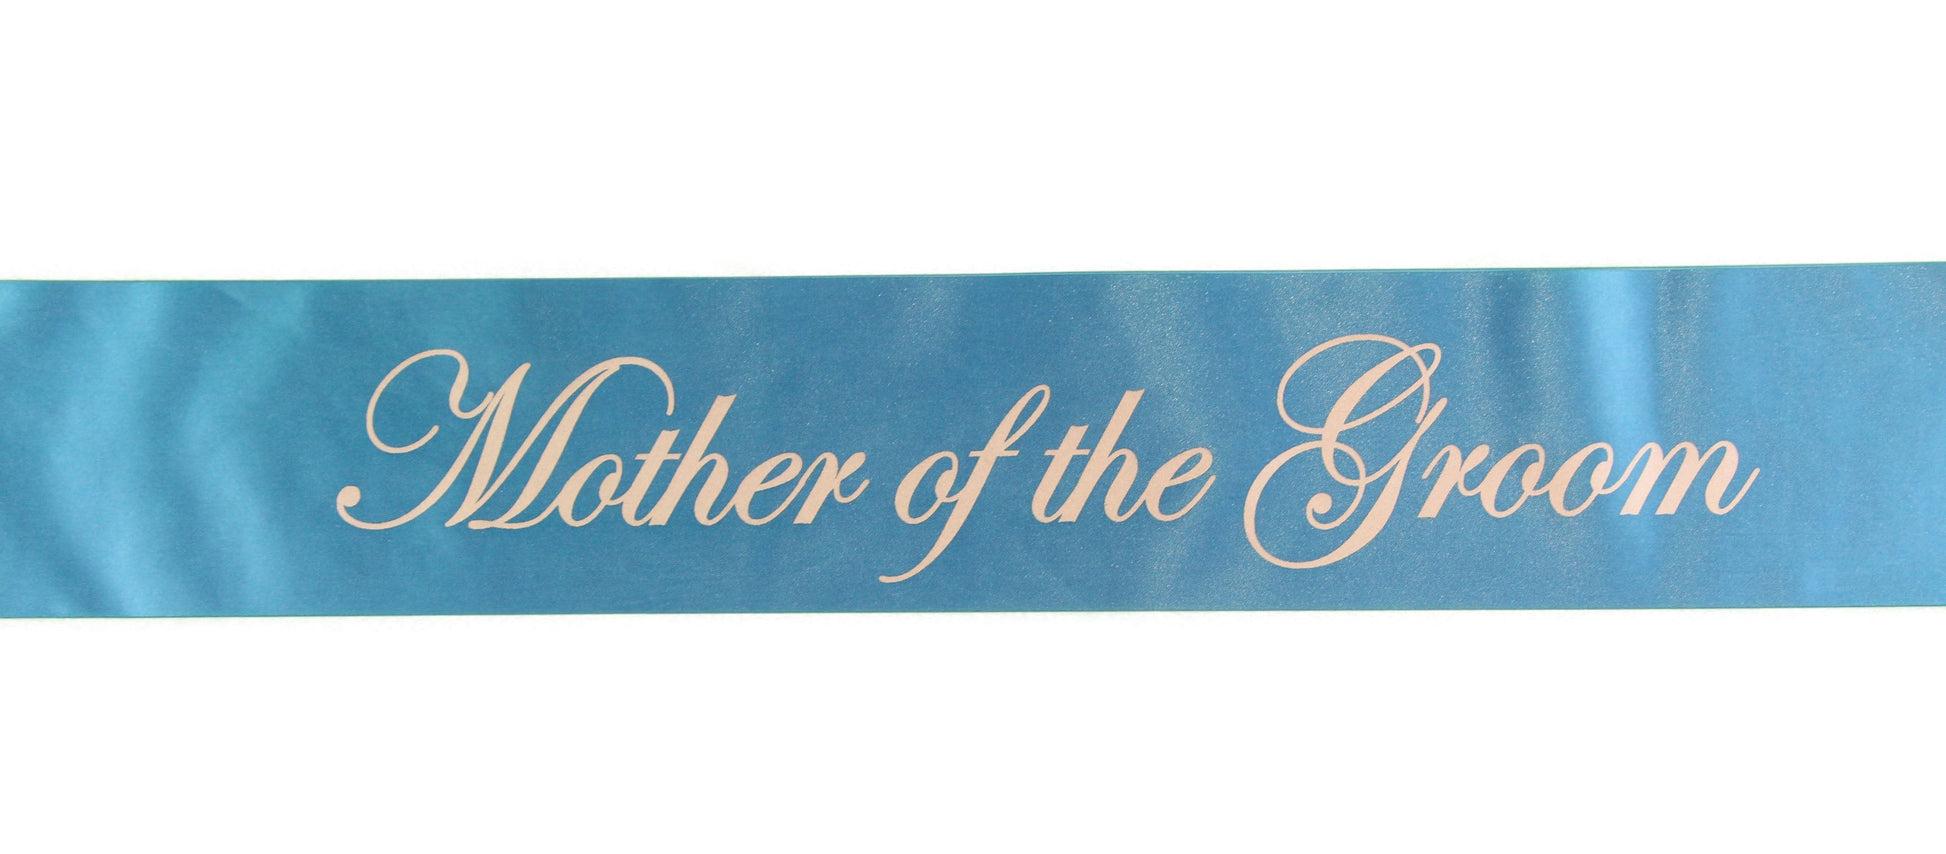 Sashes Hens Sash Party Light Blue/Silver - Mother Of The Groom